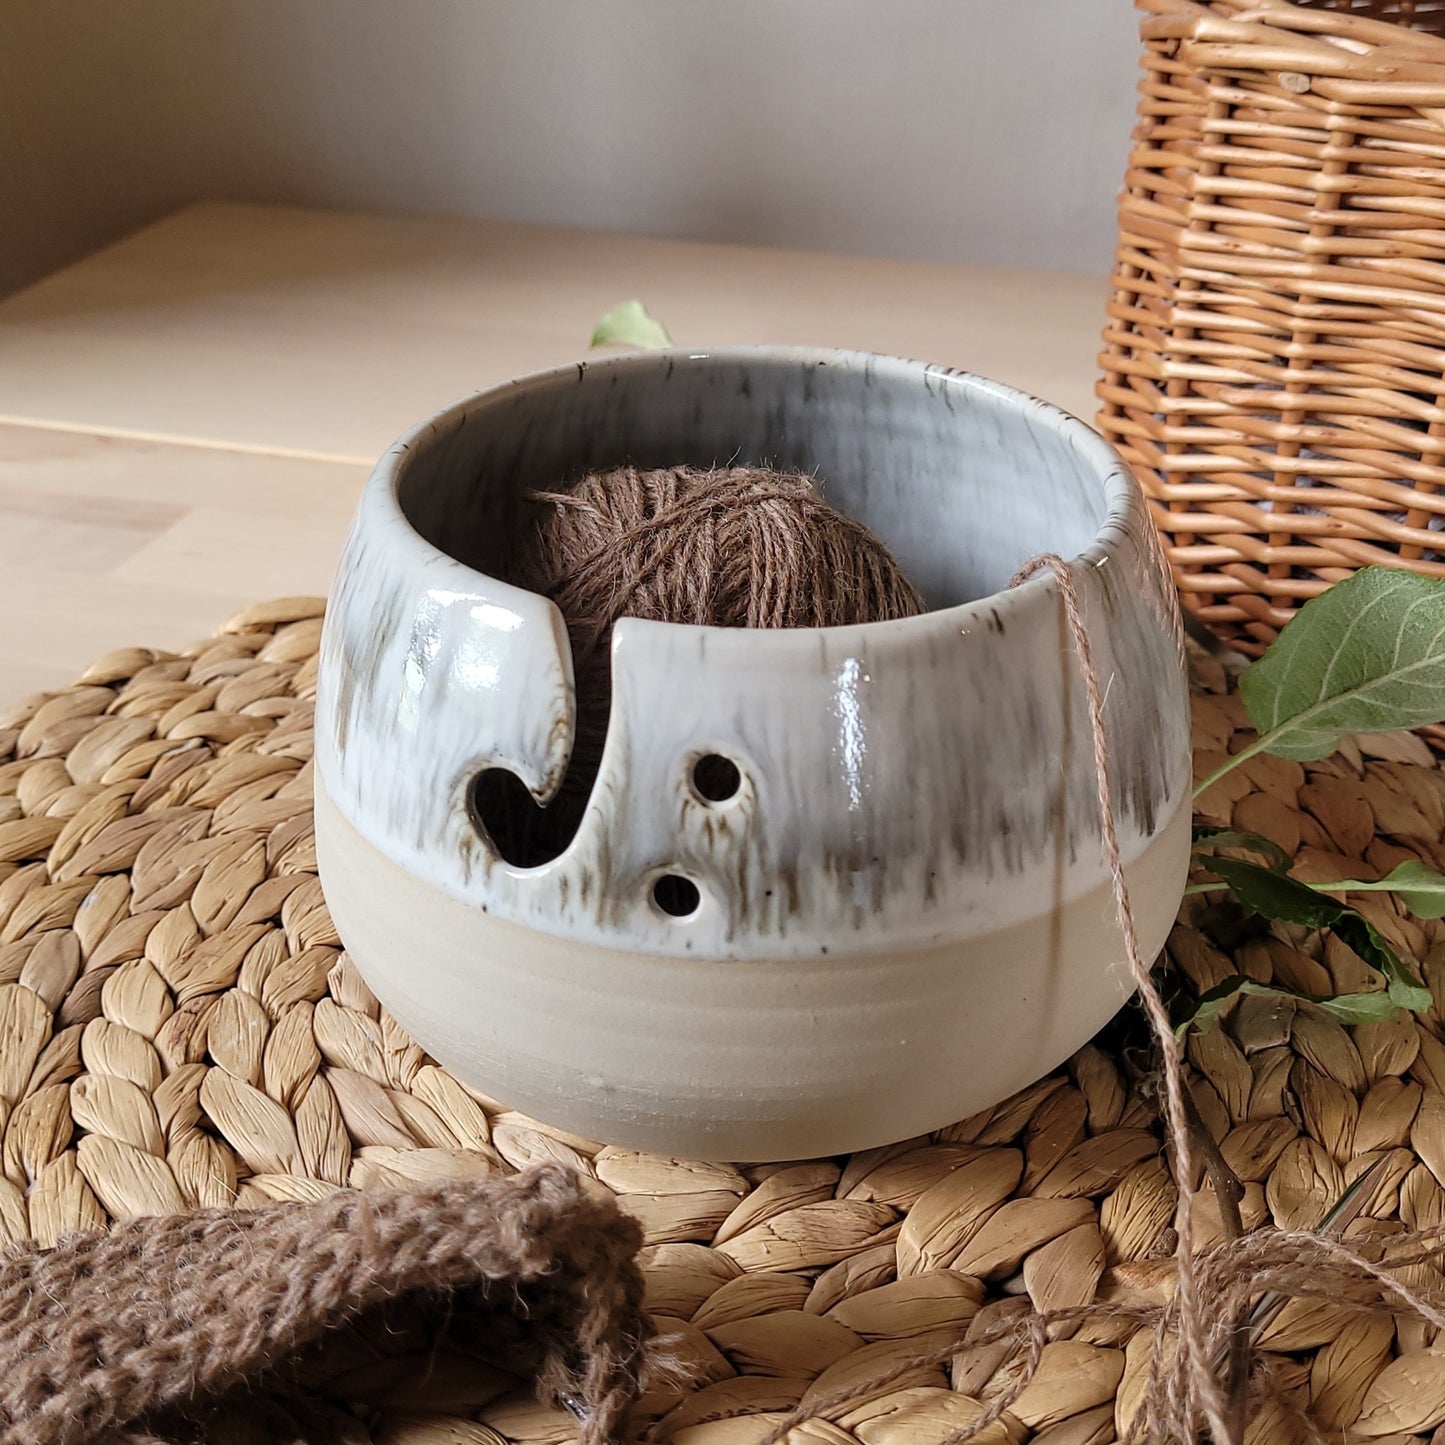 Handcrafted ceramic yarn bowl in a stunning "White+ Creamy Speckled Glaze," perfect for keeping your yarn organized and tangle-free during knitting and crochet sessions.